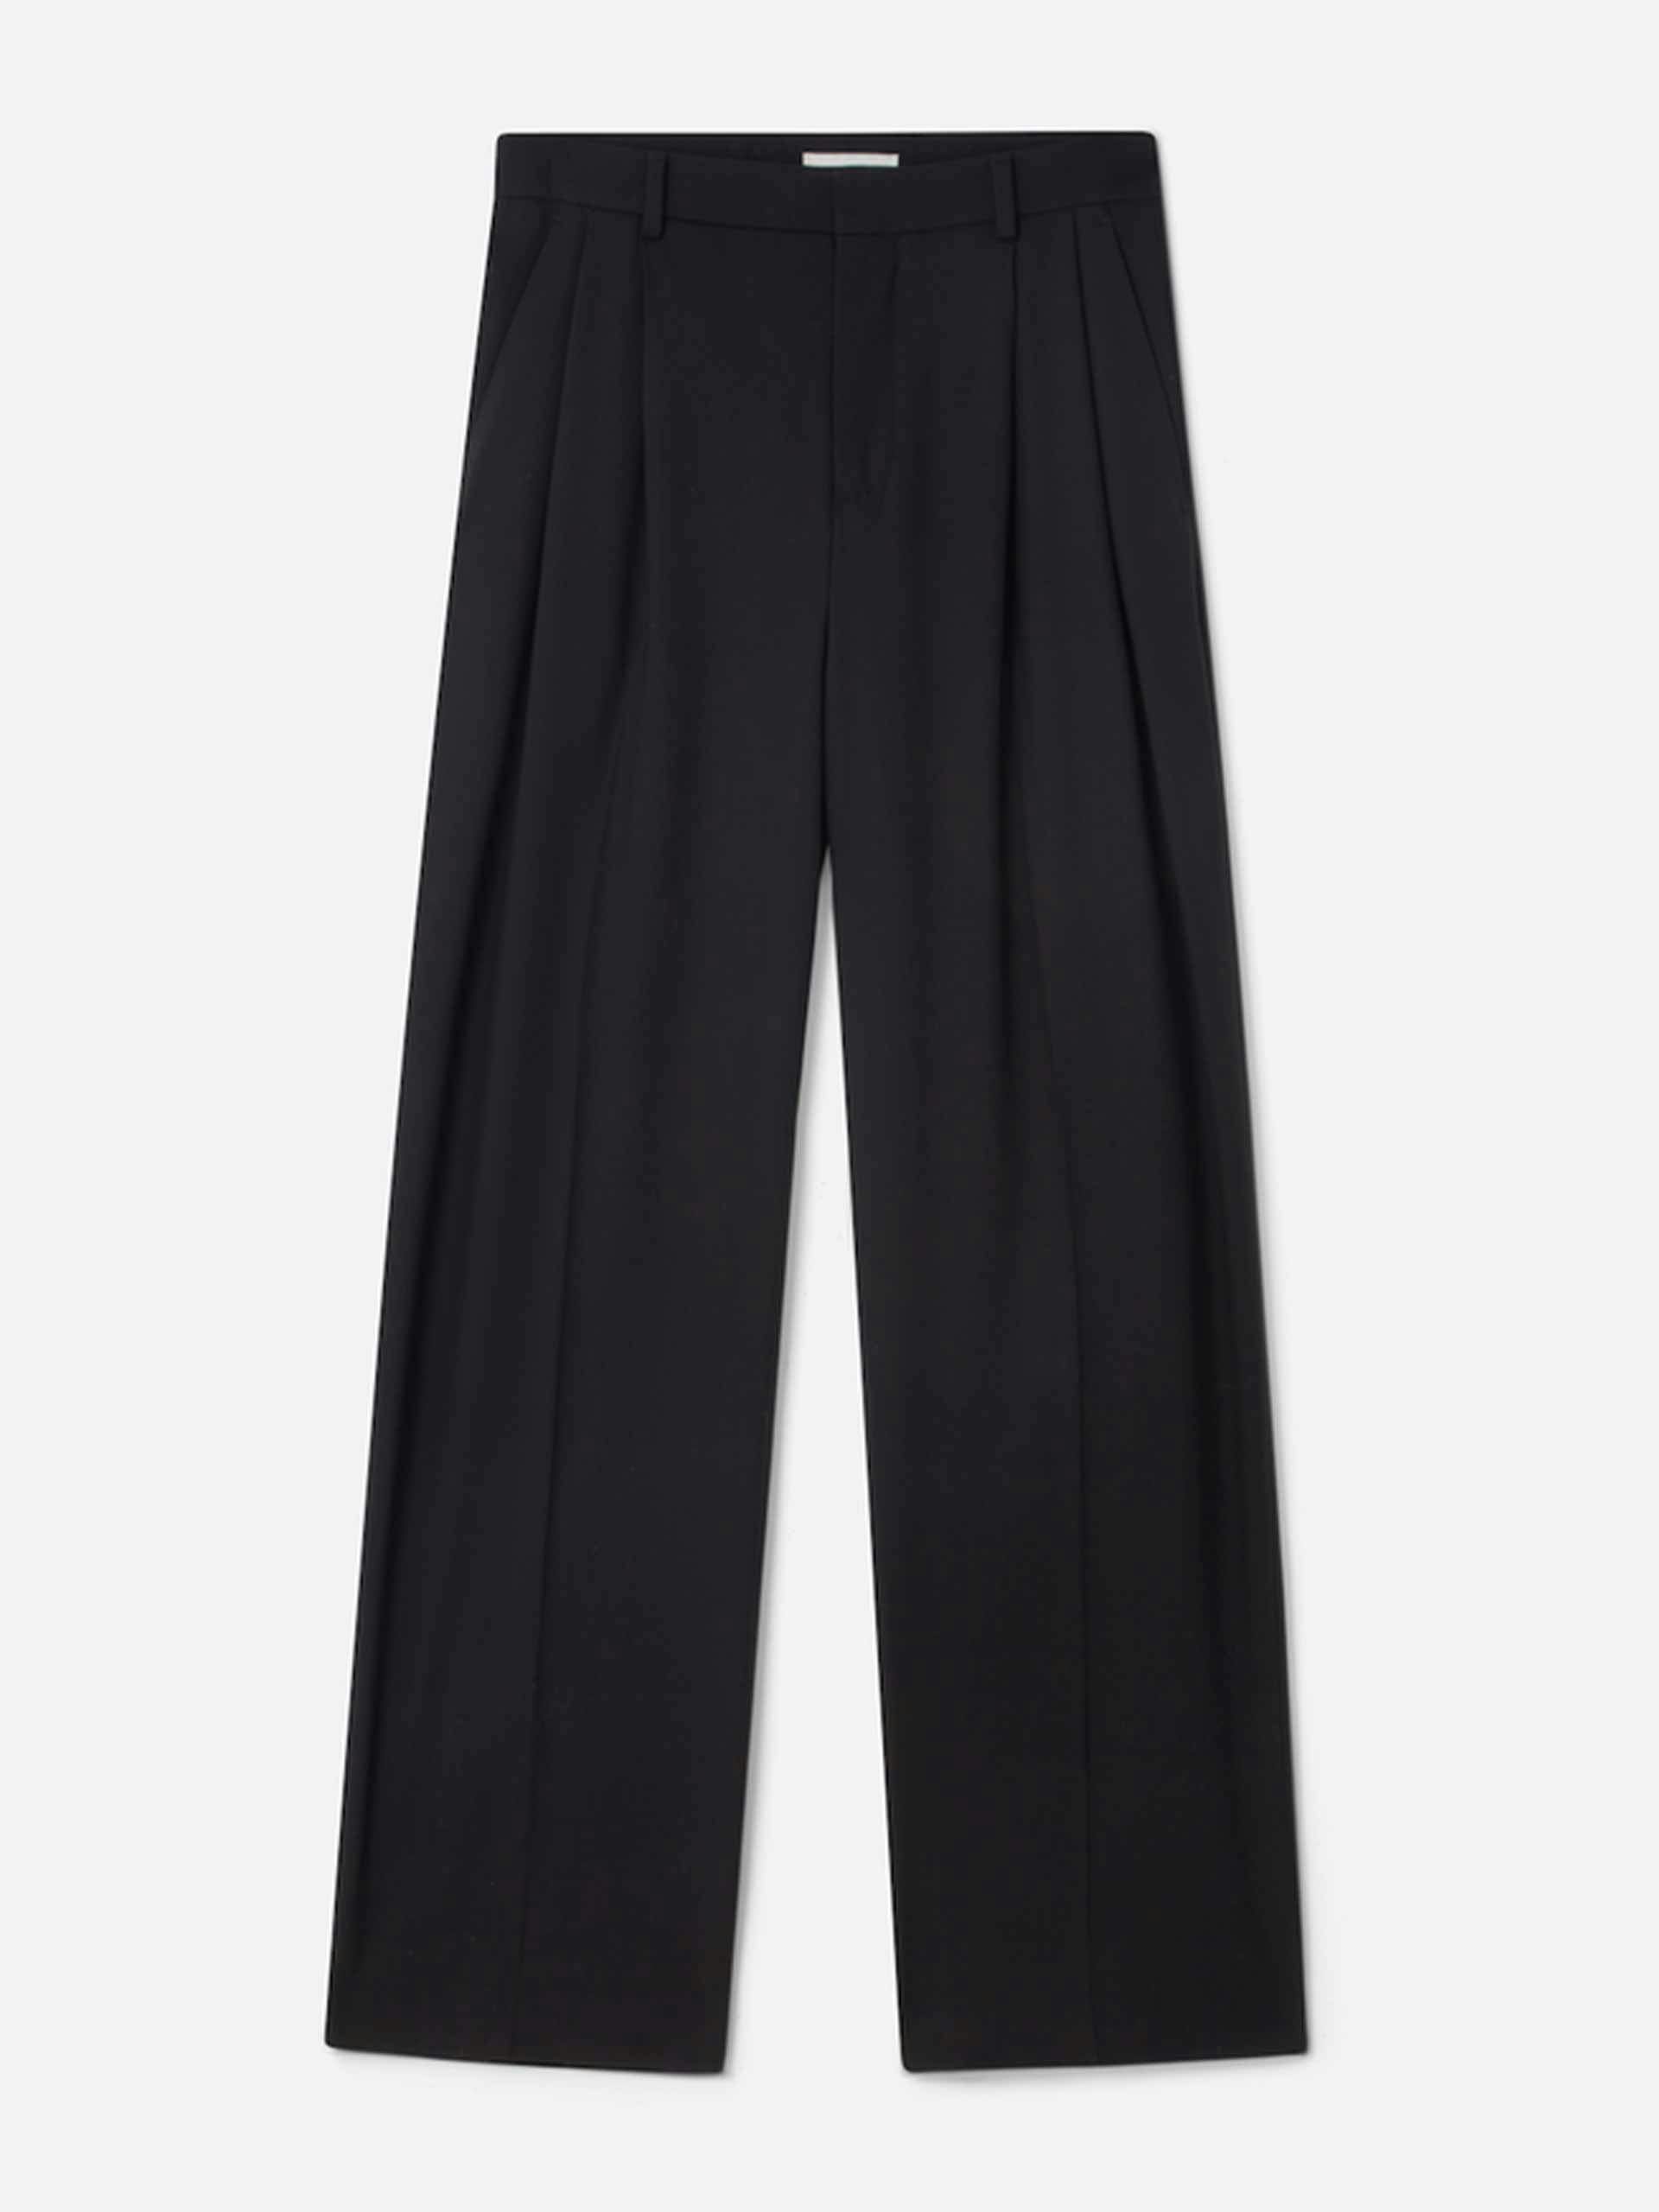 Relaxed-fit pleated black trousers